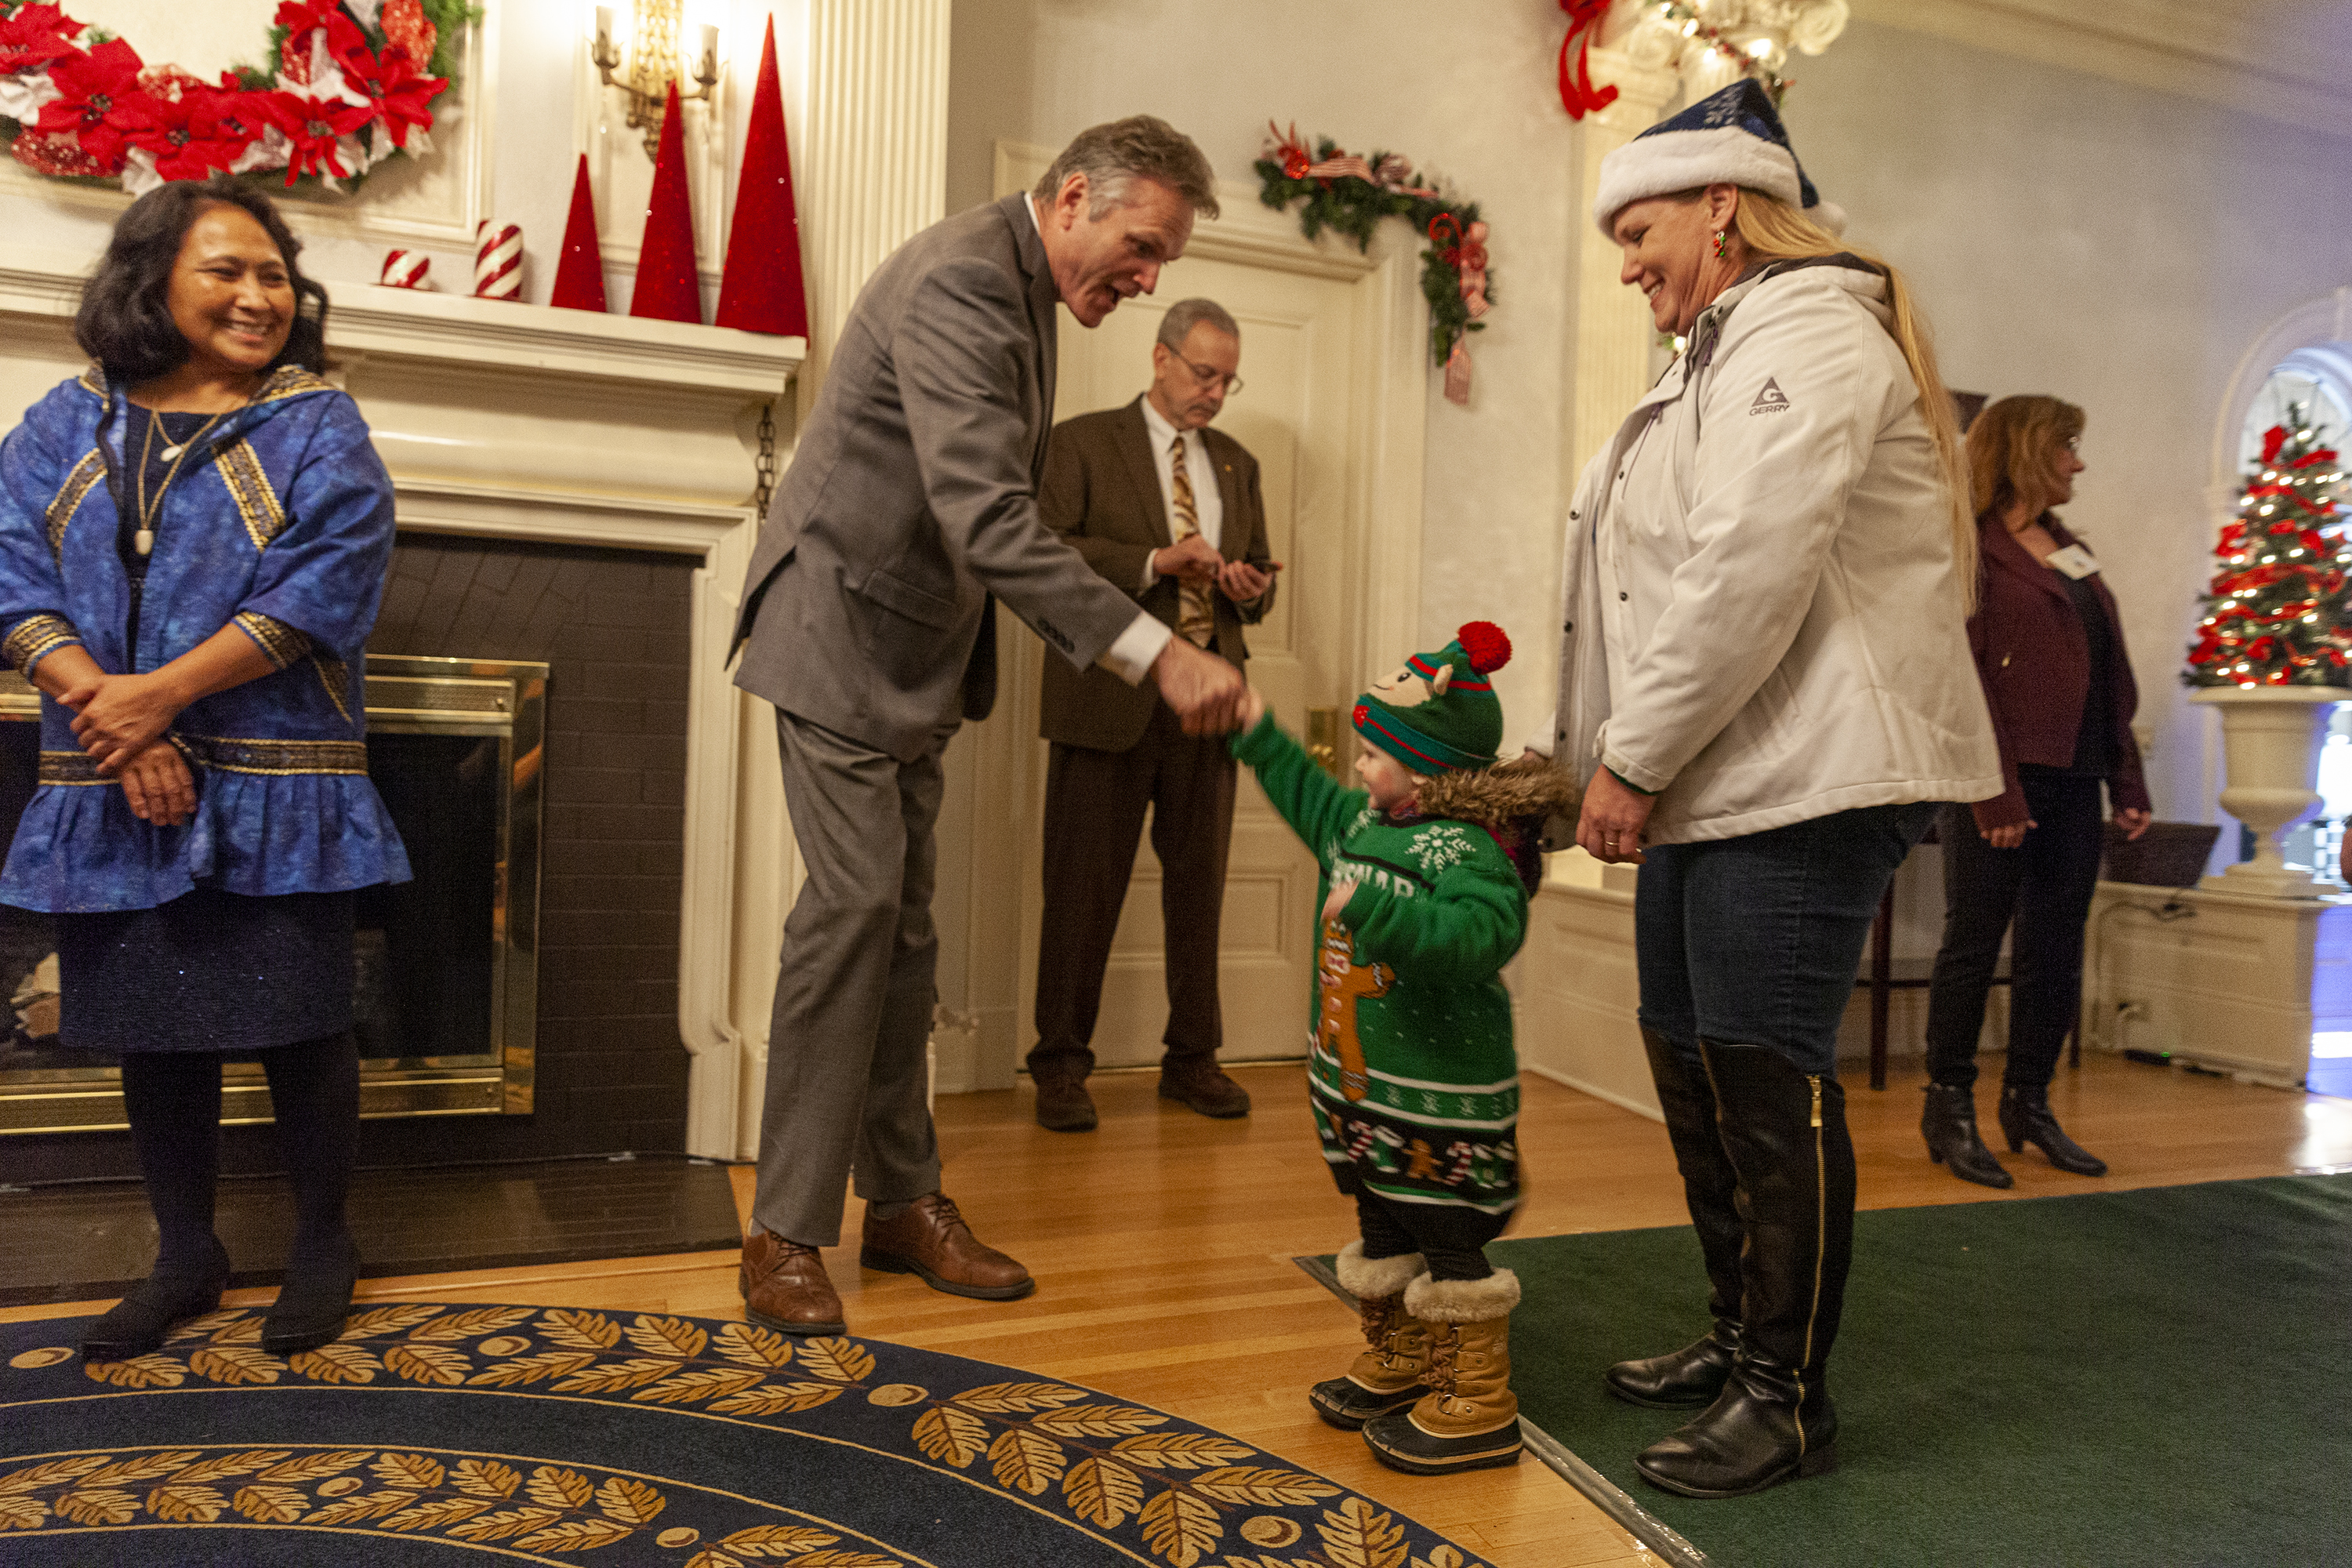 Lala Jackson, 2, shakes Gov. Mike Dunleavy's hand during the annual Christmas open house on Tuesday, Dec. 10, 2019, in Juneau, Alaska. According to the Governor's office, 15,000 cookies were baked and more than 100 pounds of fudge and chocolate candy was on hand for visitors.